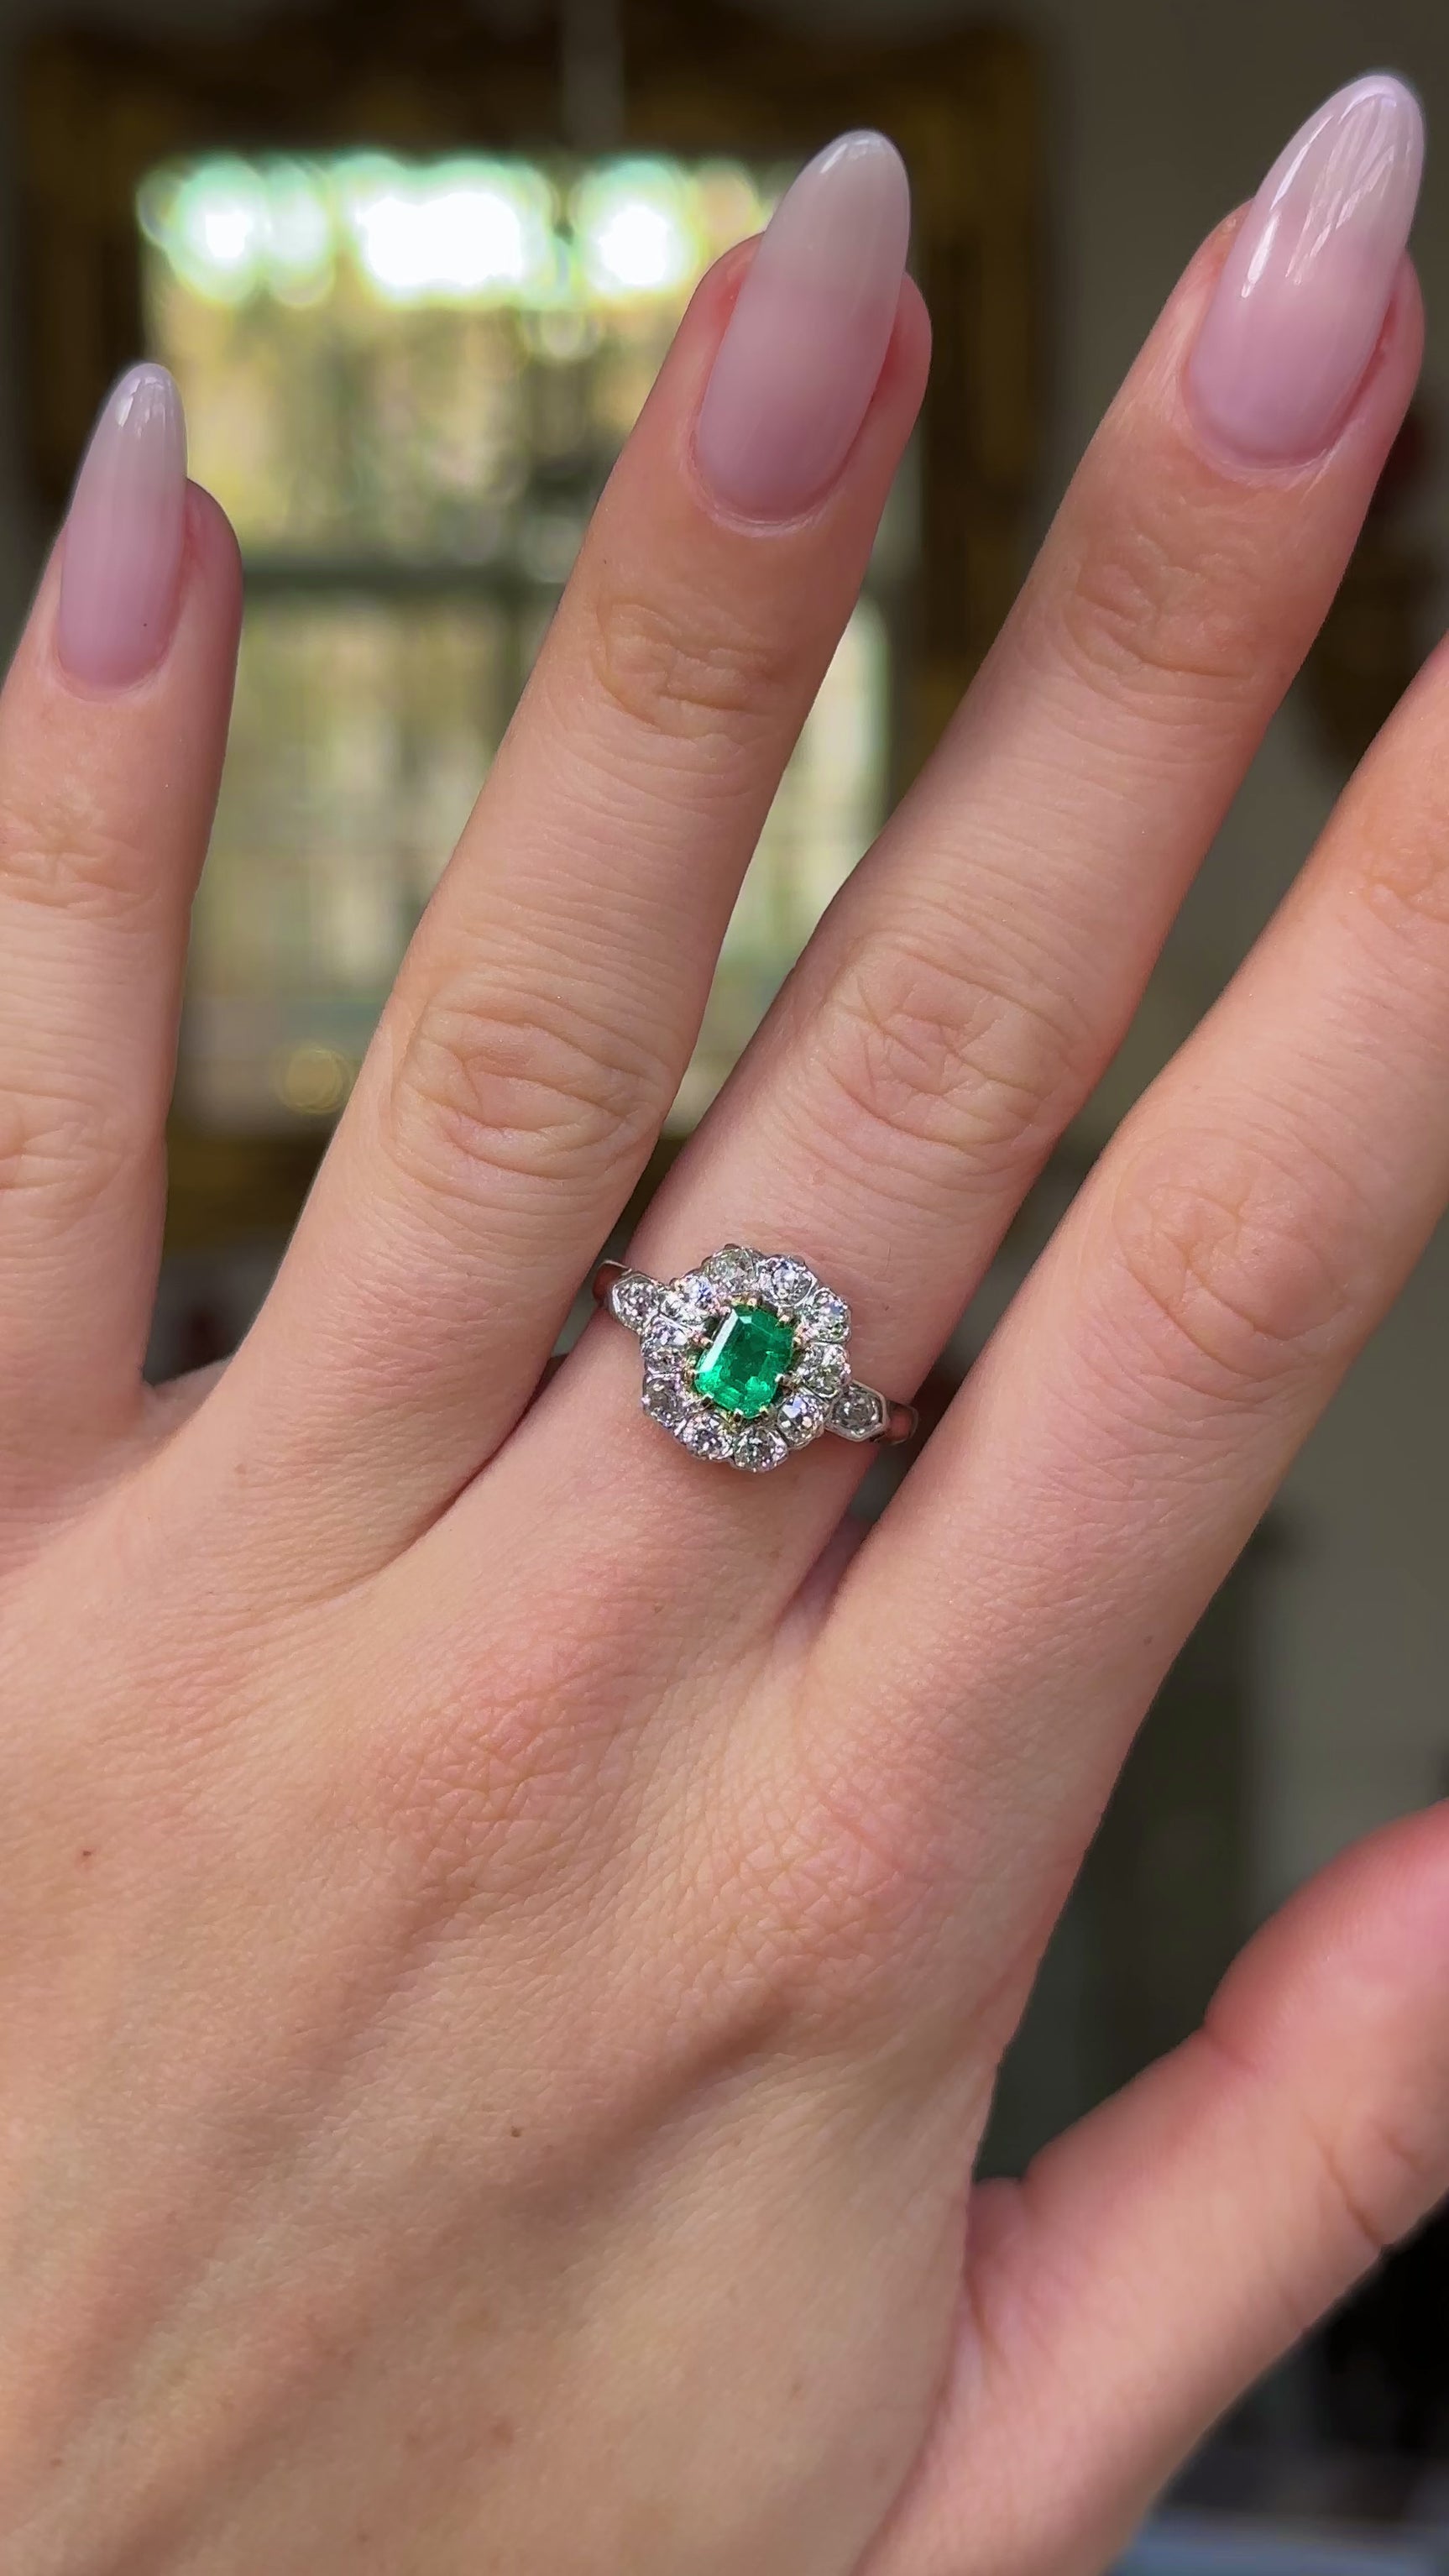 Edwardian emerald and diamond ring worn on hand and moved around to give perspective.